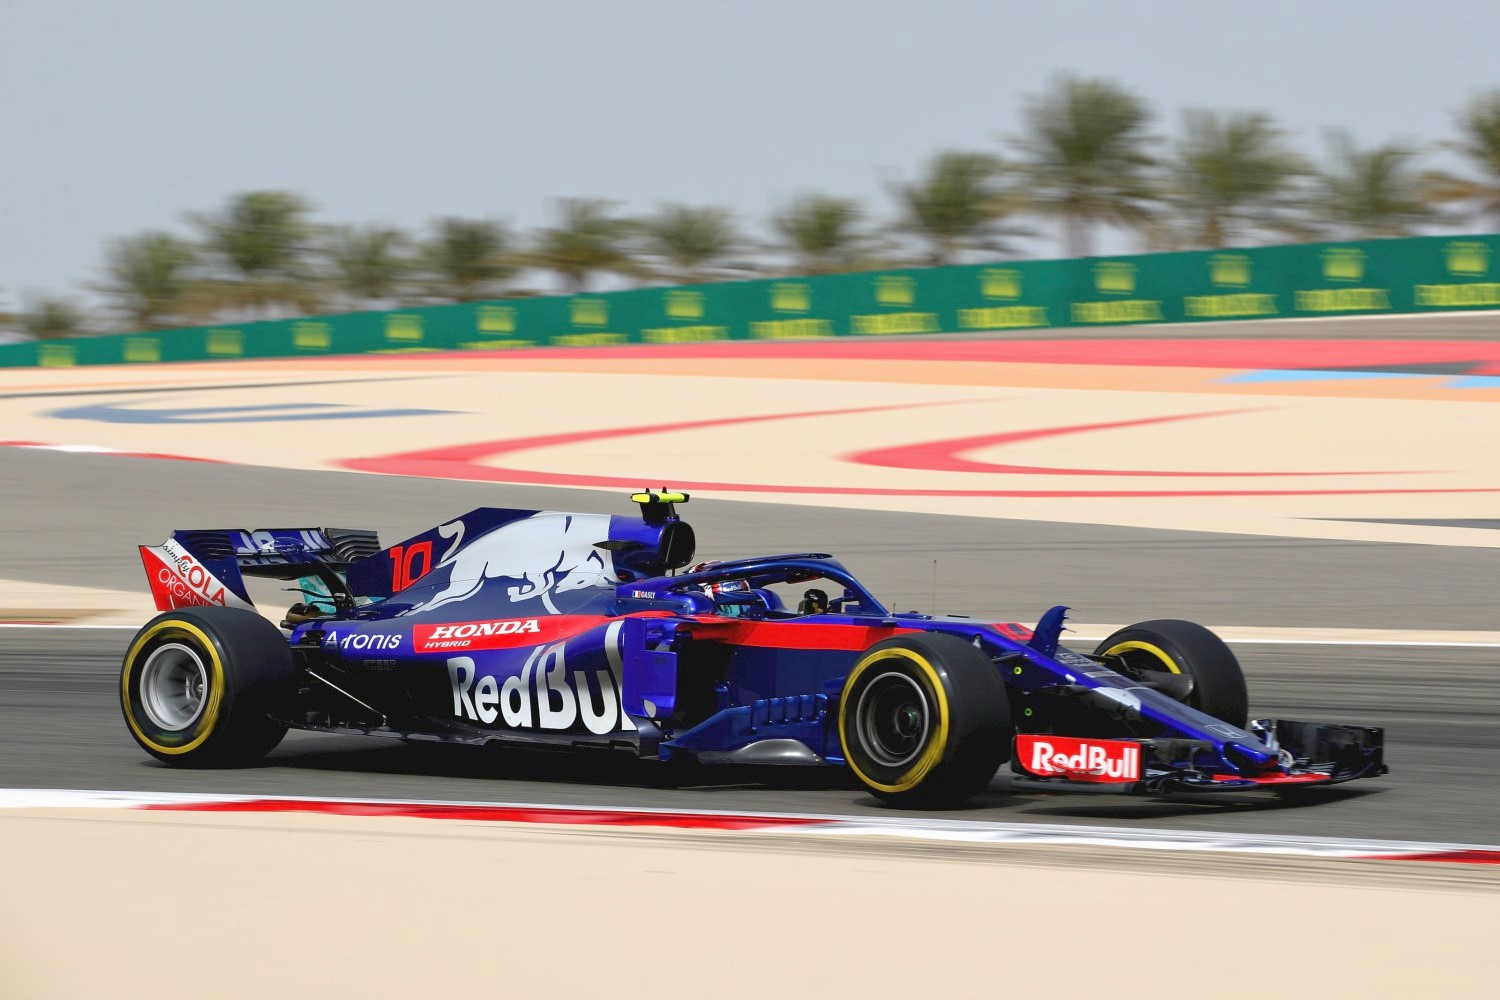 Gasly in the Honda powered Toro Rosso. Both Honda cars outqualified both McLarens